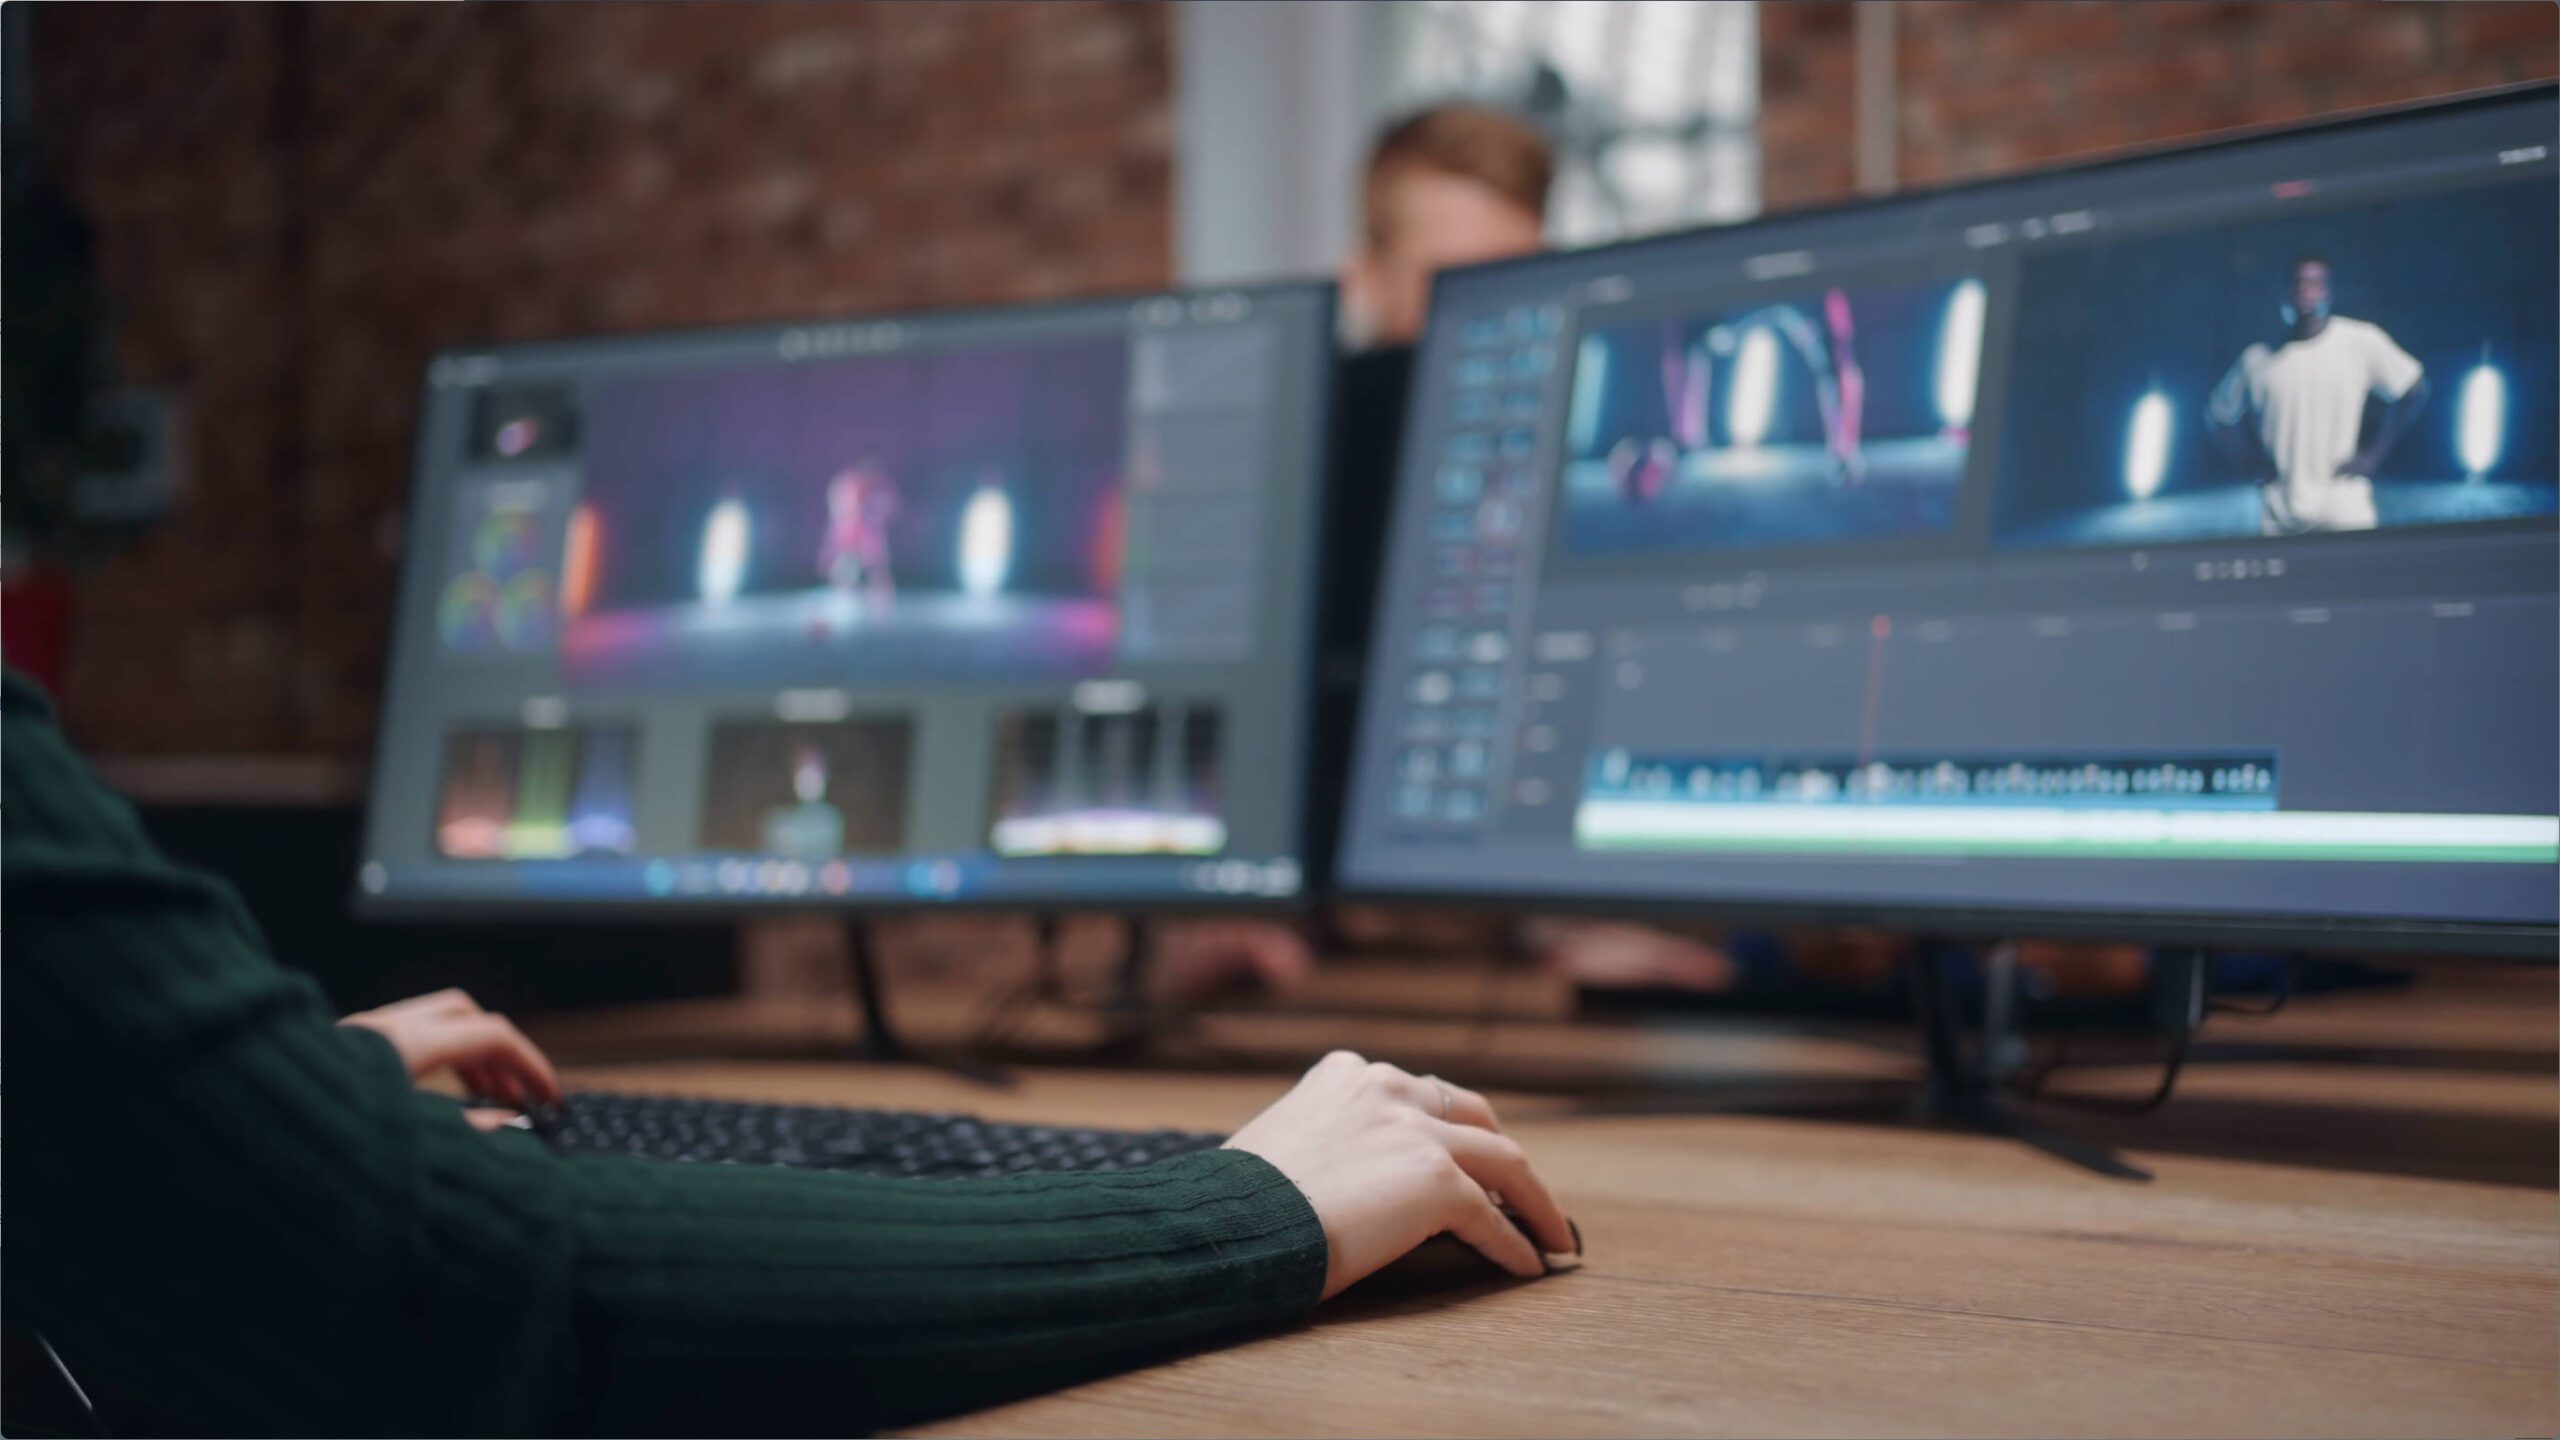 hands on keyboard in front of two monitors showing video editing software | Lumira Studio Video Production Hertfordshire